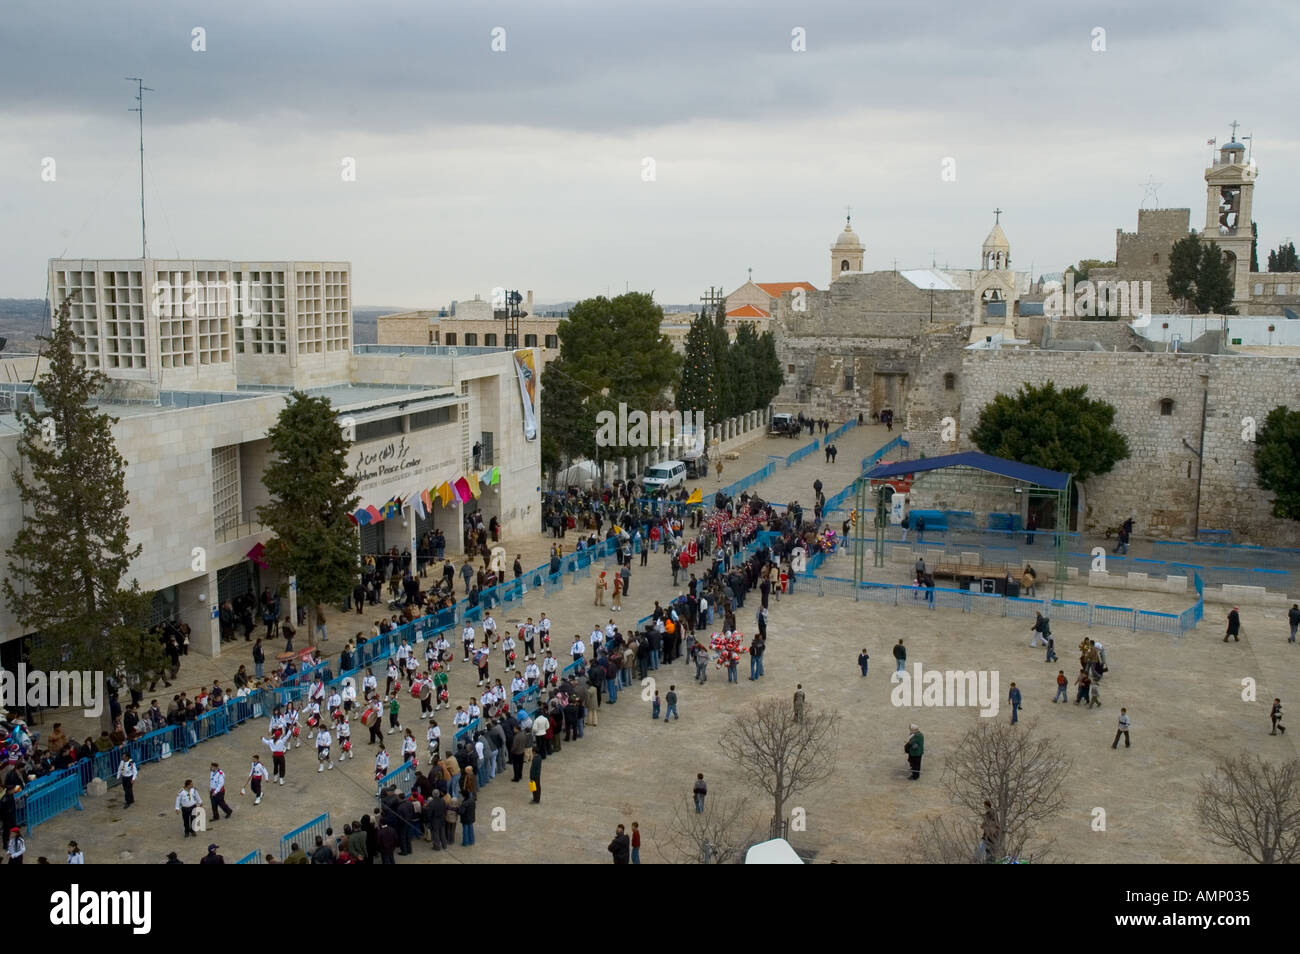 Palestinian Authority Bethlehem Mager Square elevated view with church of Nativity peace center and scouts band marching Stock Photo